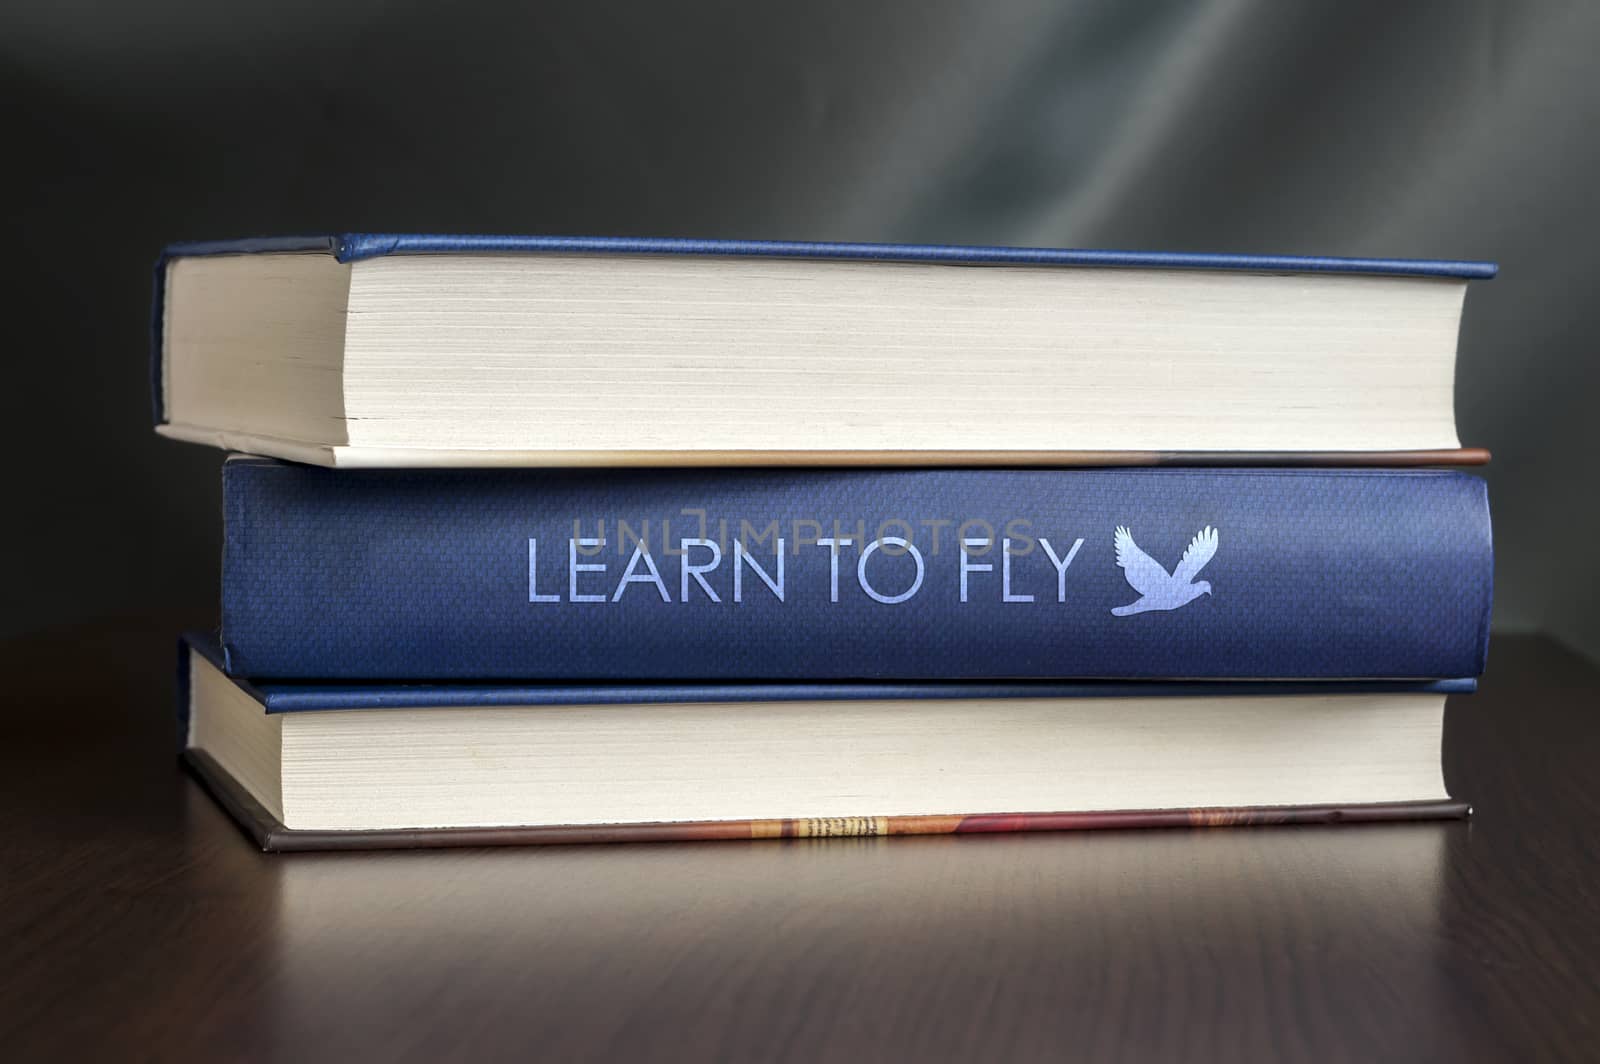 Books on a table and one with "Learn to fly" cover. Book concept.